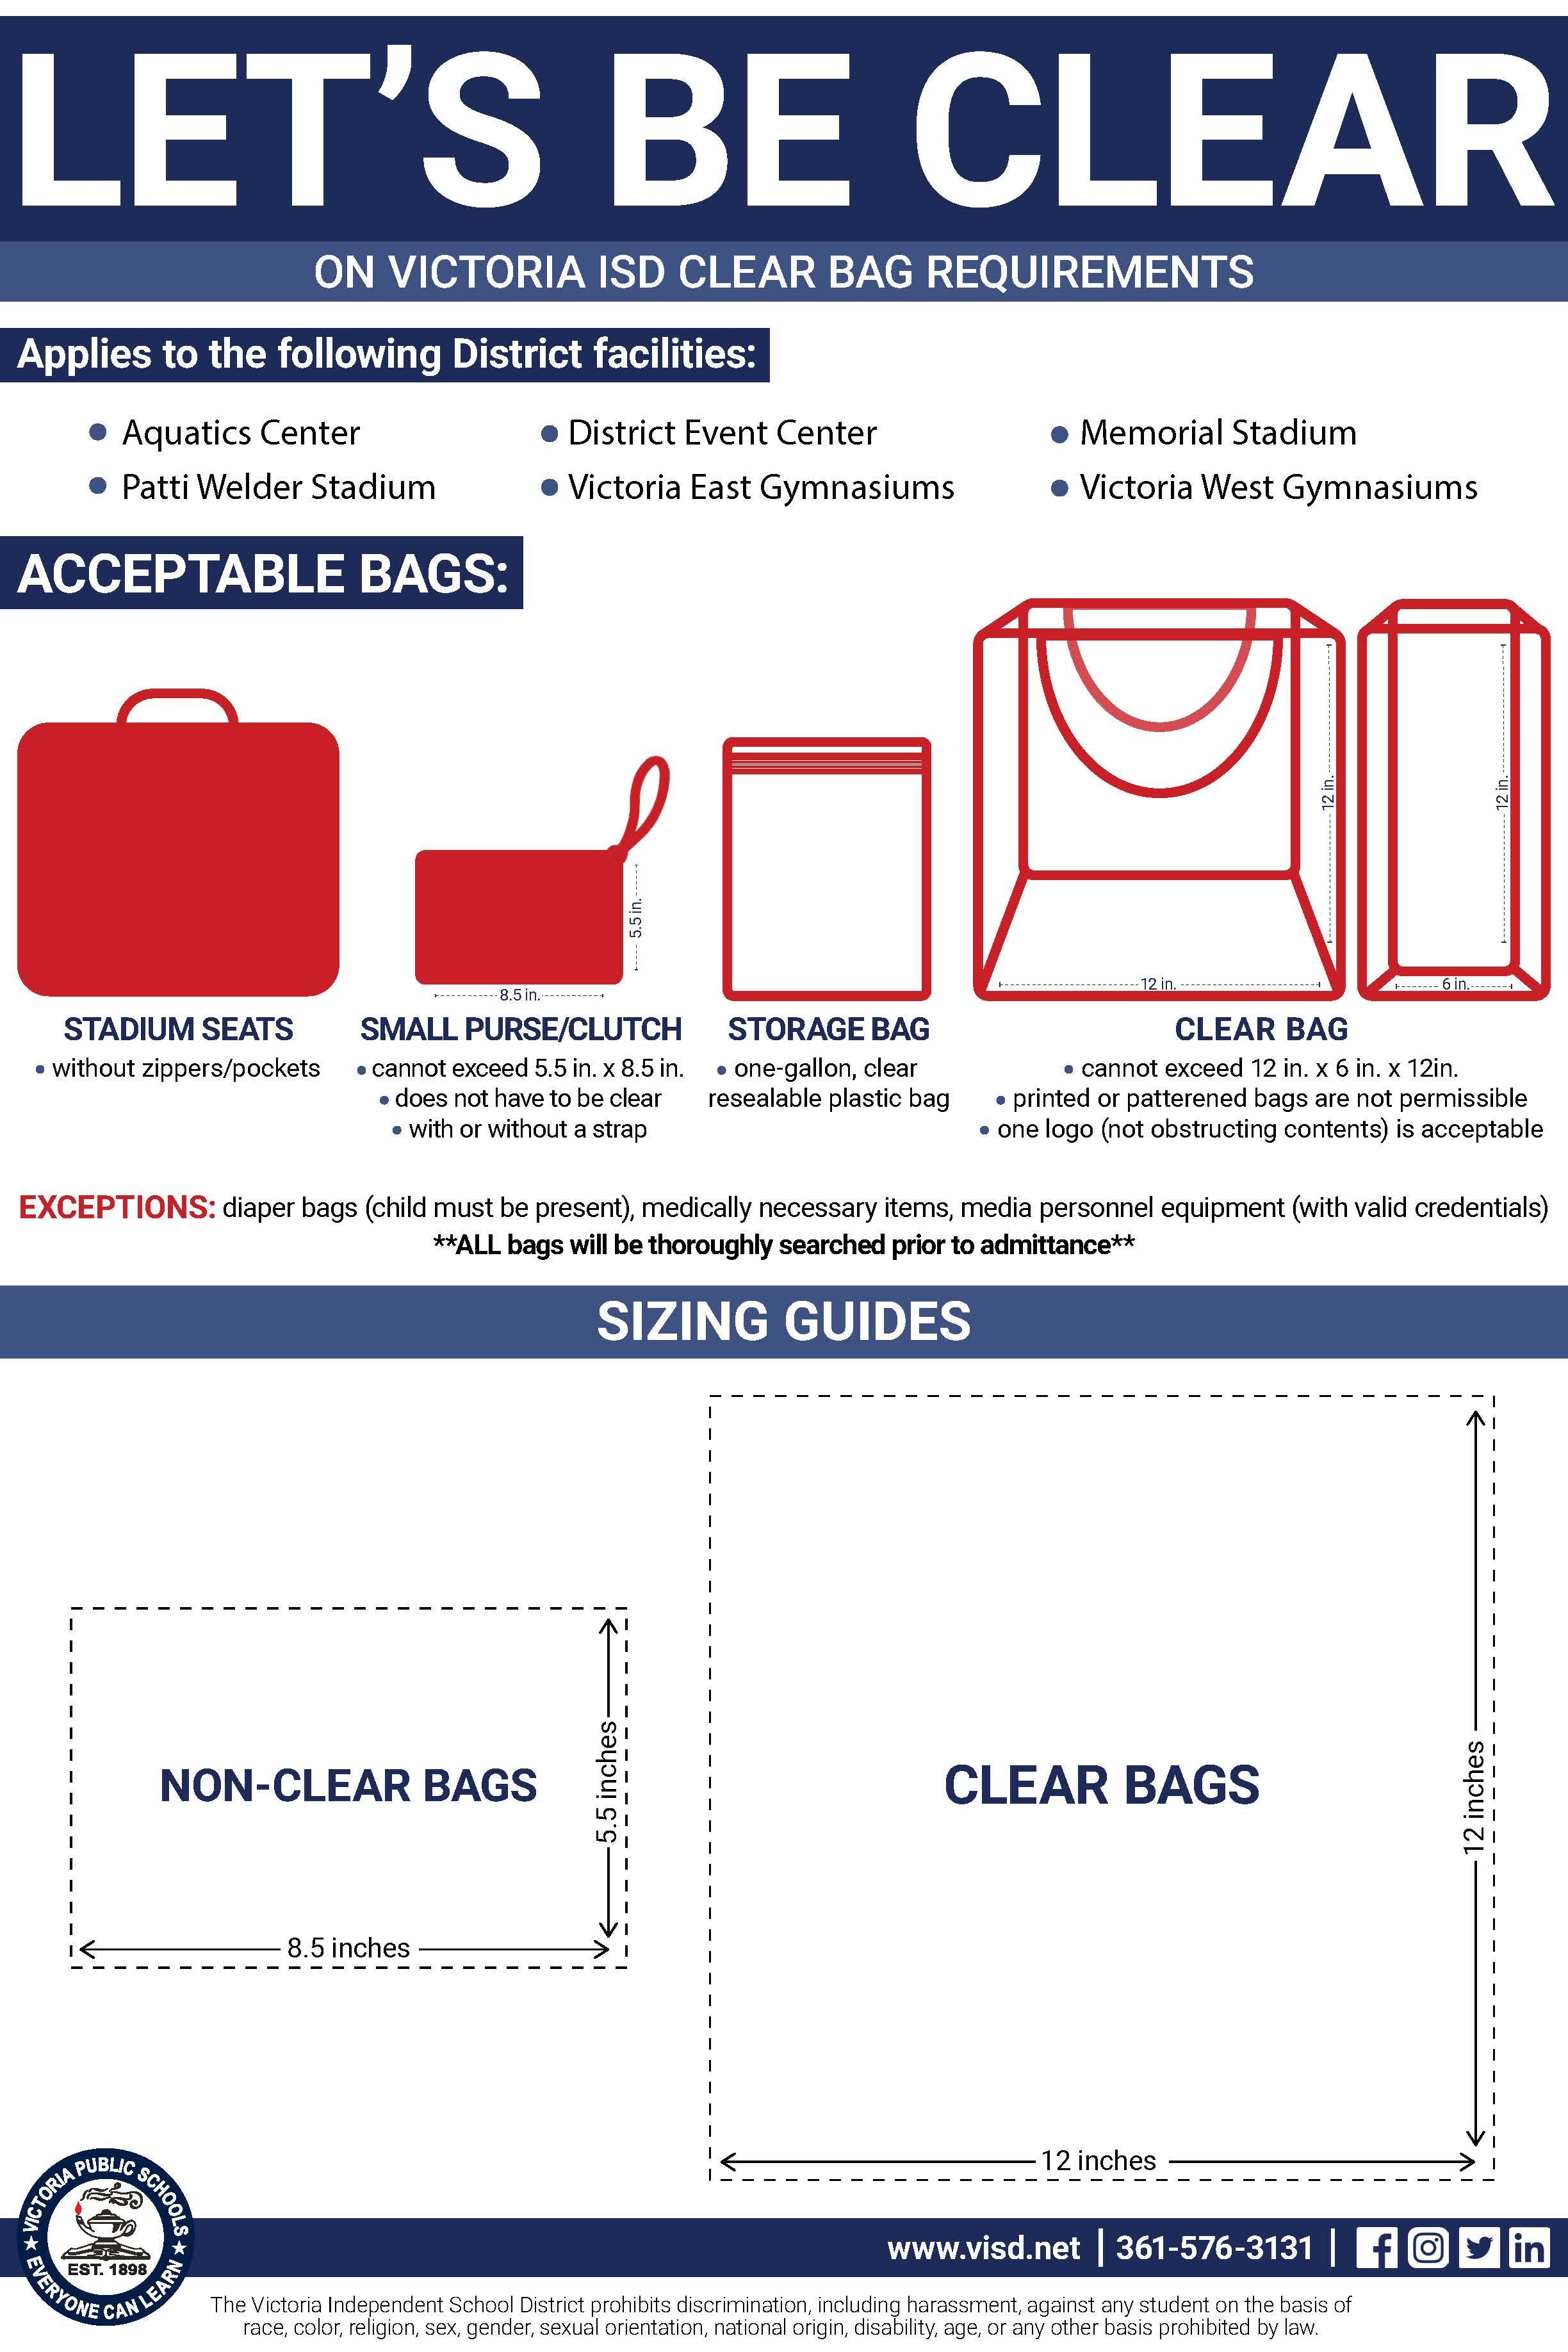 Victoria ISD Clear Bag Policy